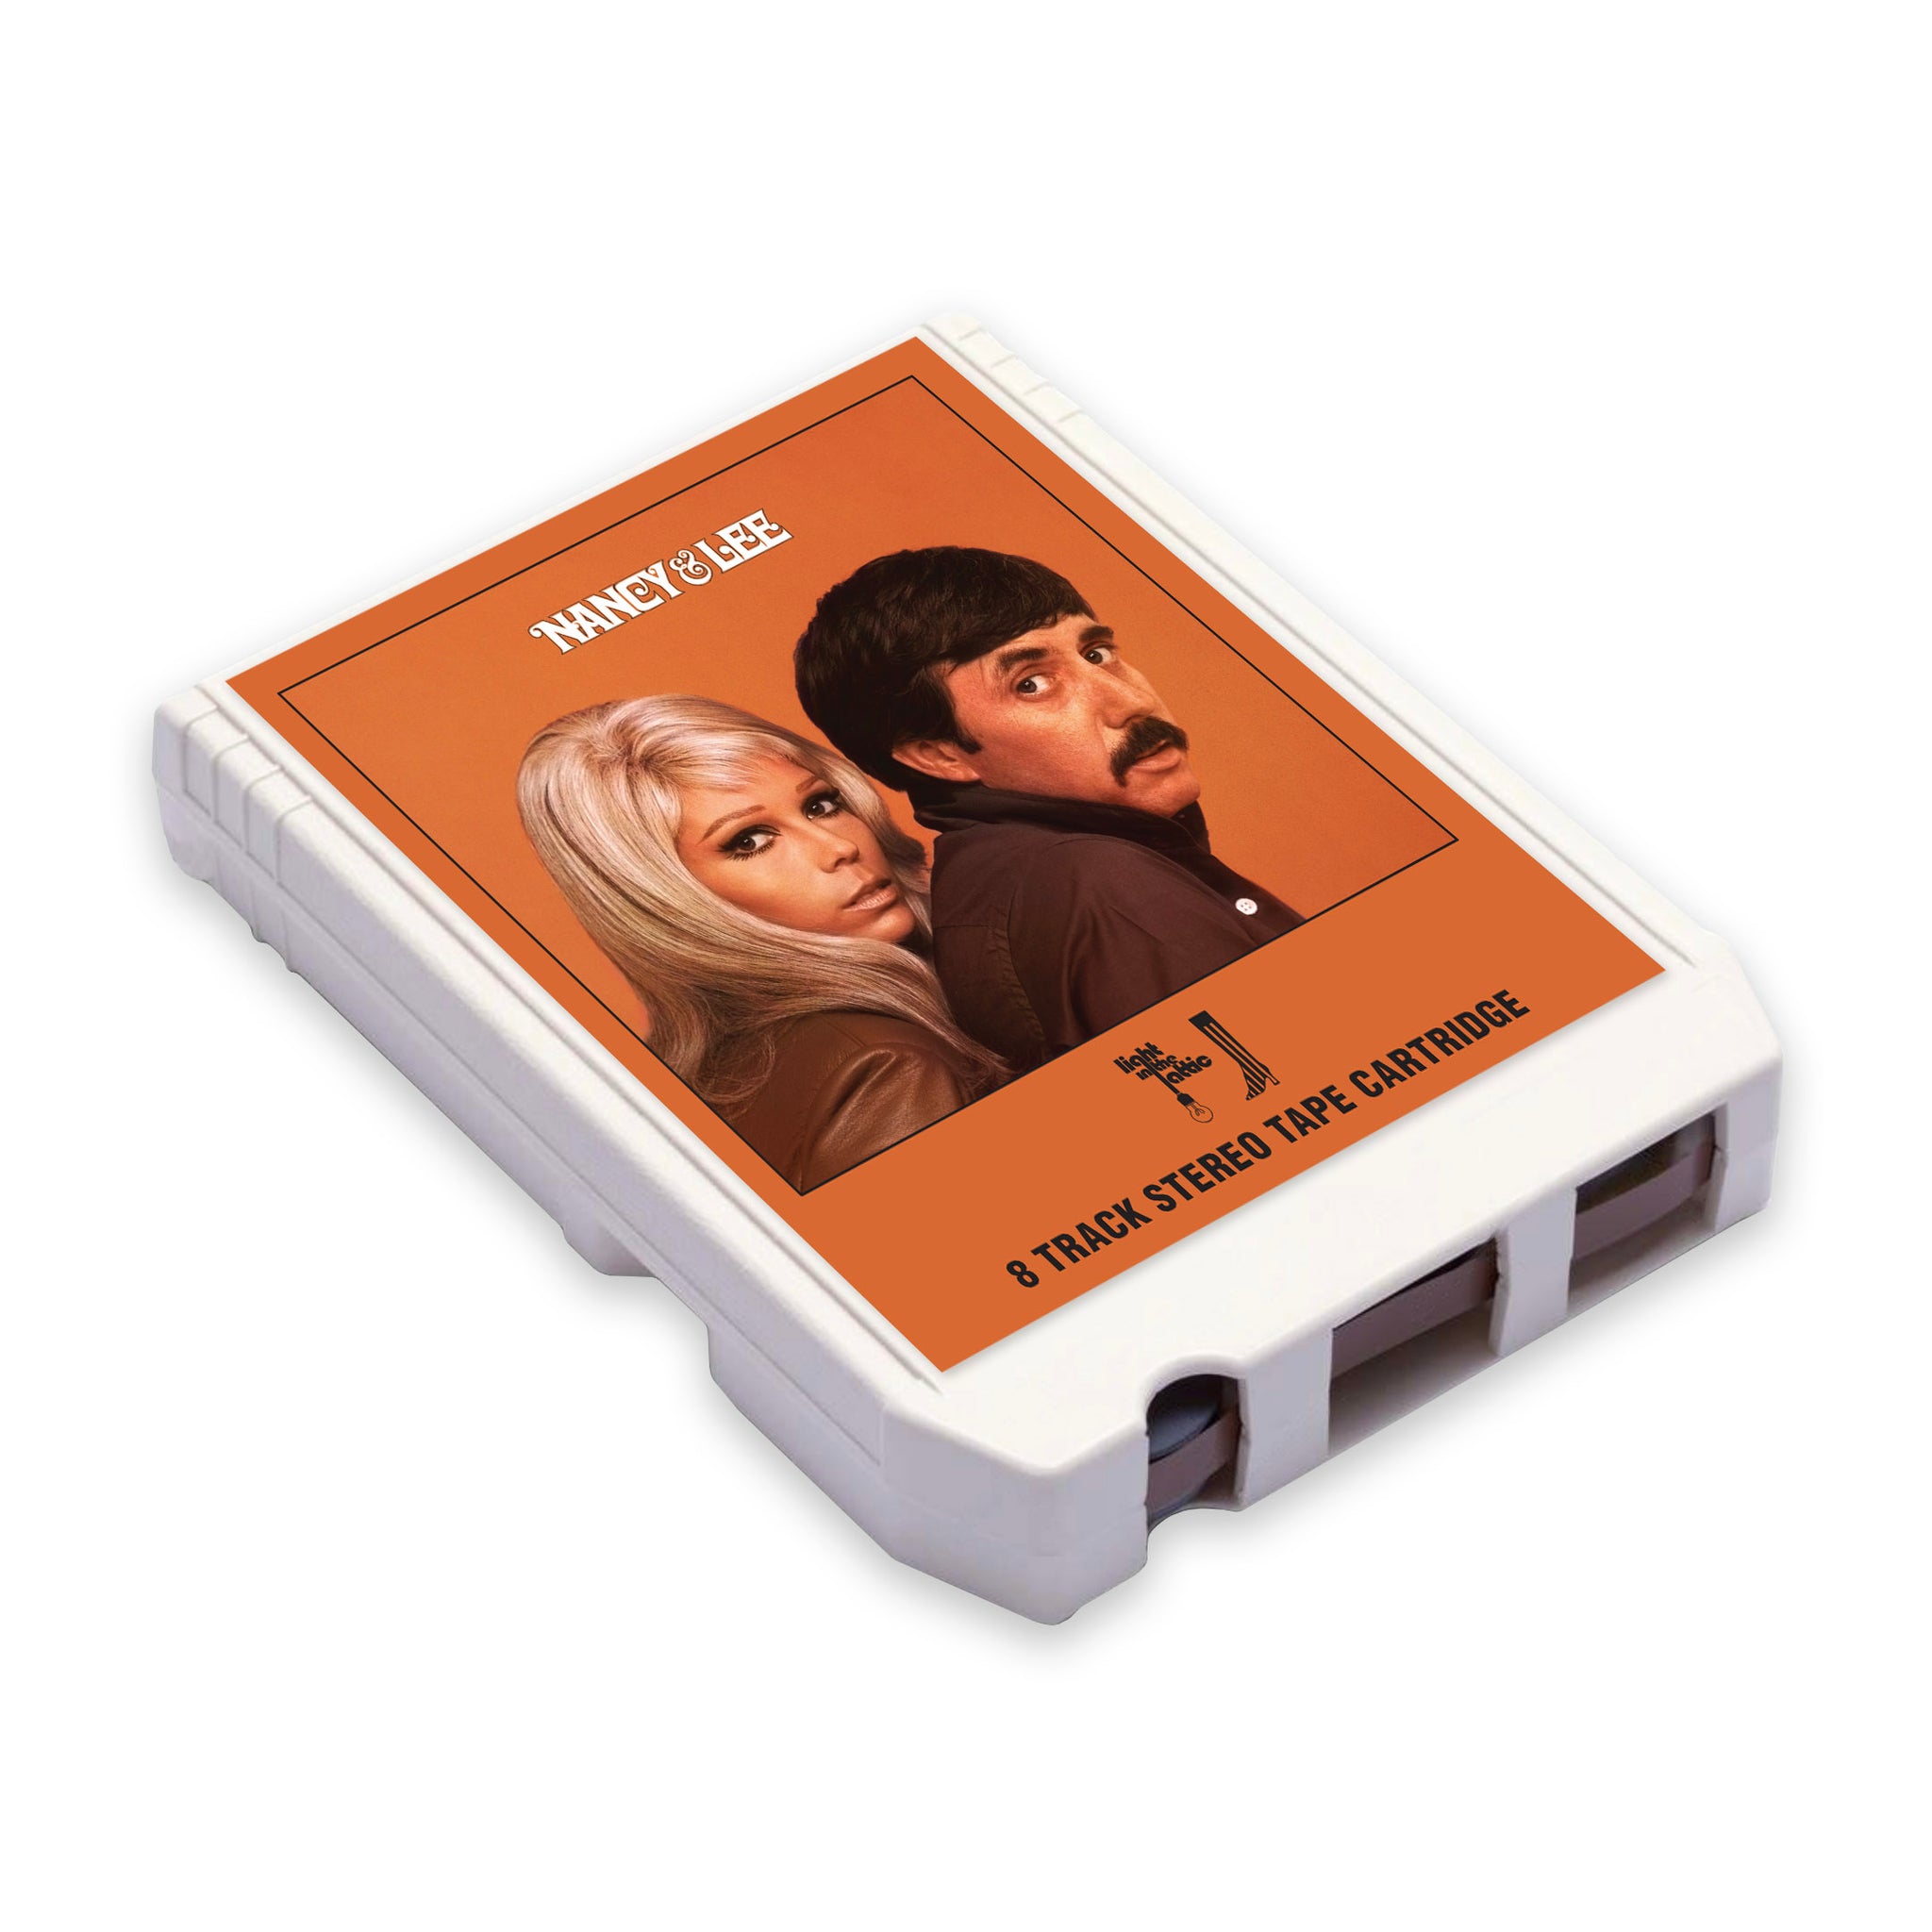 Limited Edition Nancy & Lee 8-Track Cartridge